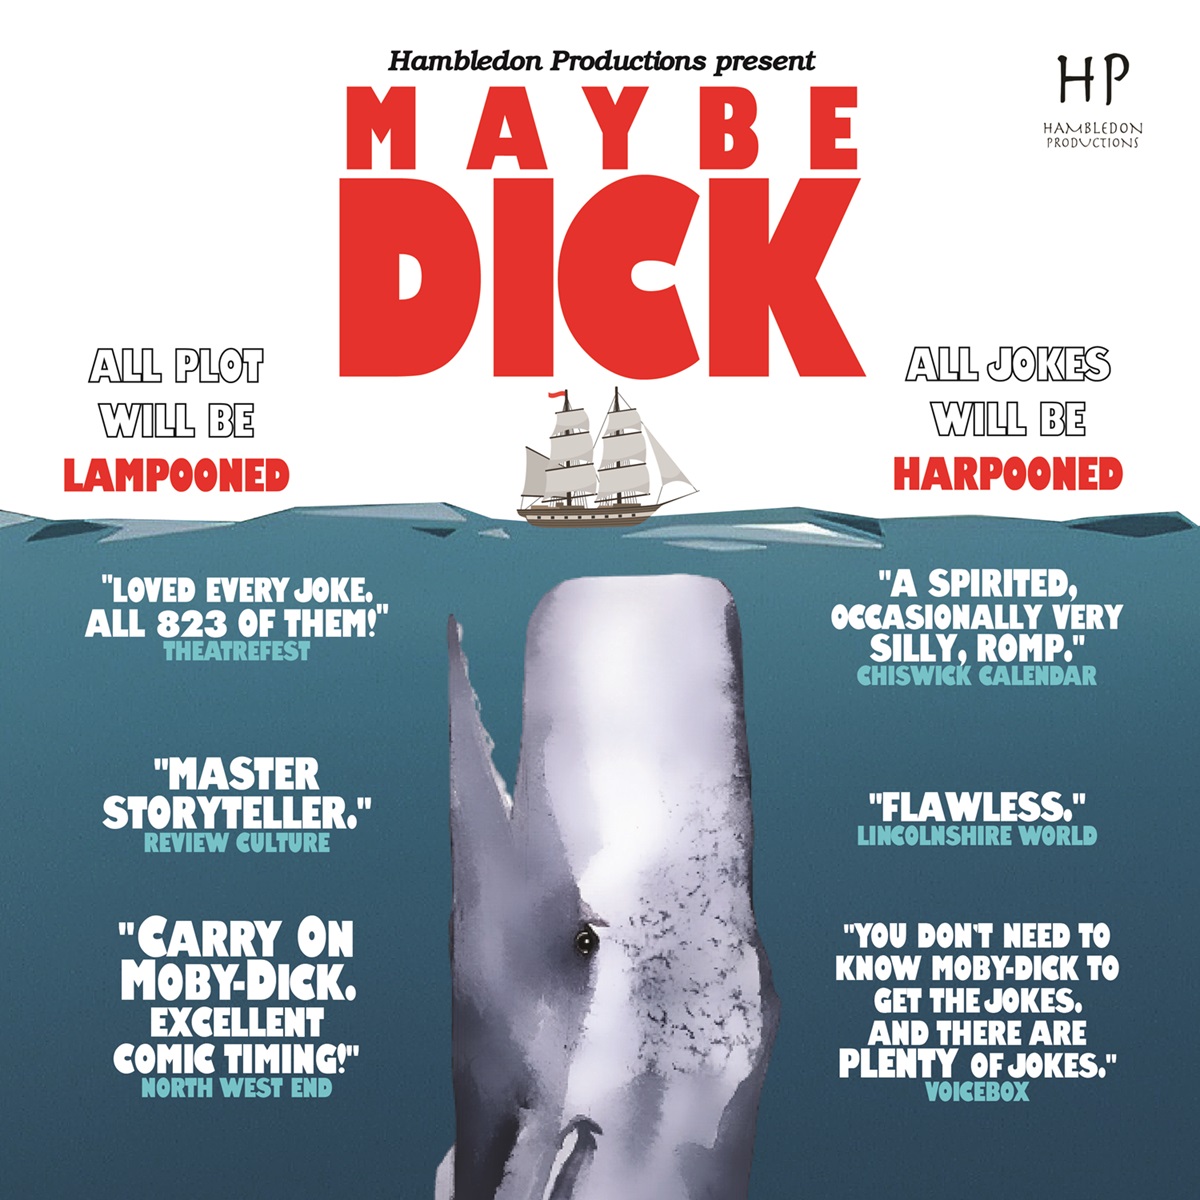 On 23.05.24, @hambledon_productions brings 'Maybe Dick' to Theatre@41! Herman Melville's classic tale of revenge and retribution is retold in this inventive, comedic adventure on the high seas. Tickets: tickets.41monkgate.co.uk